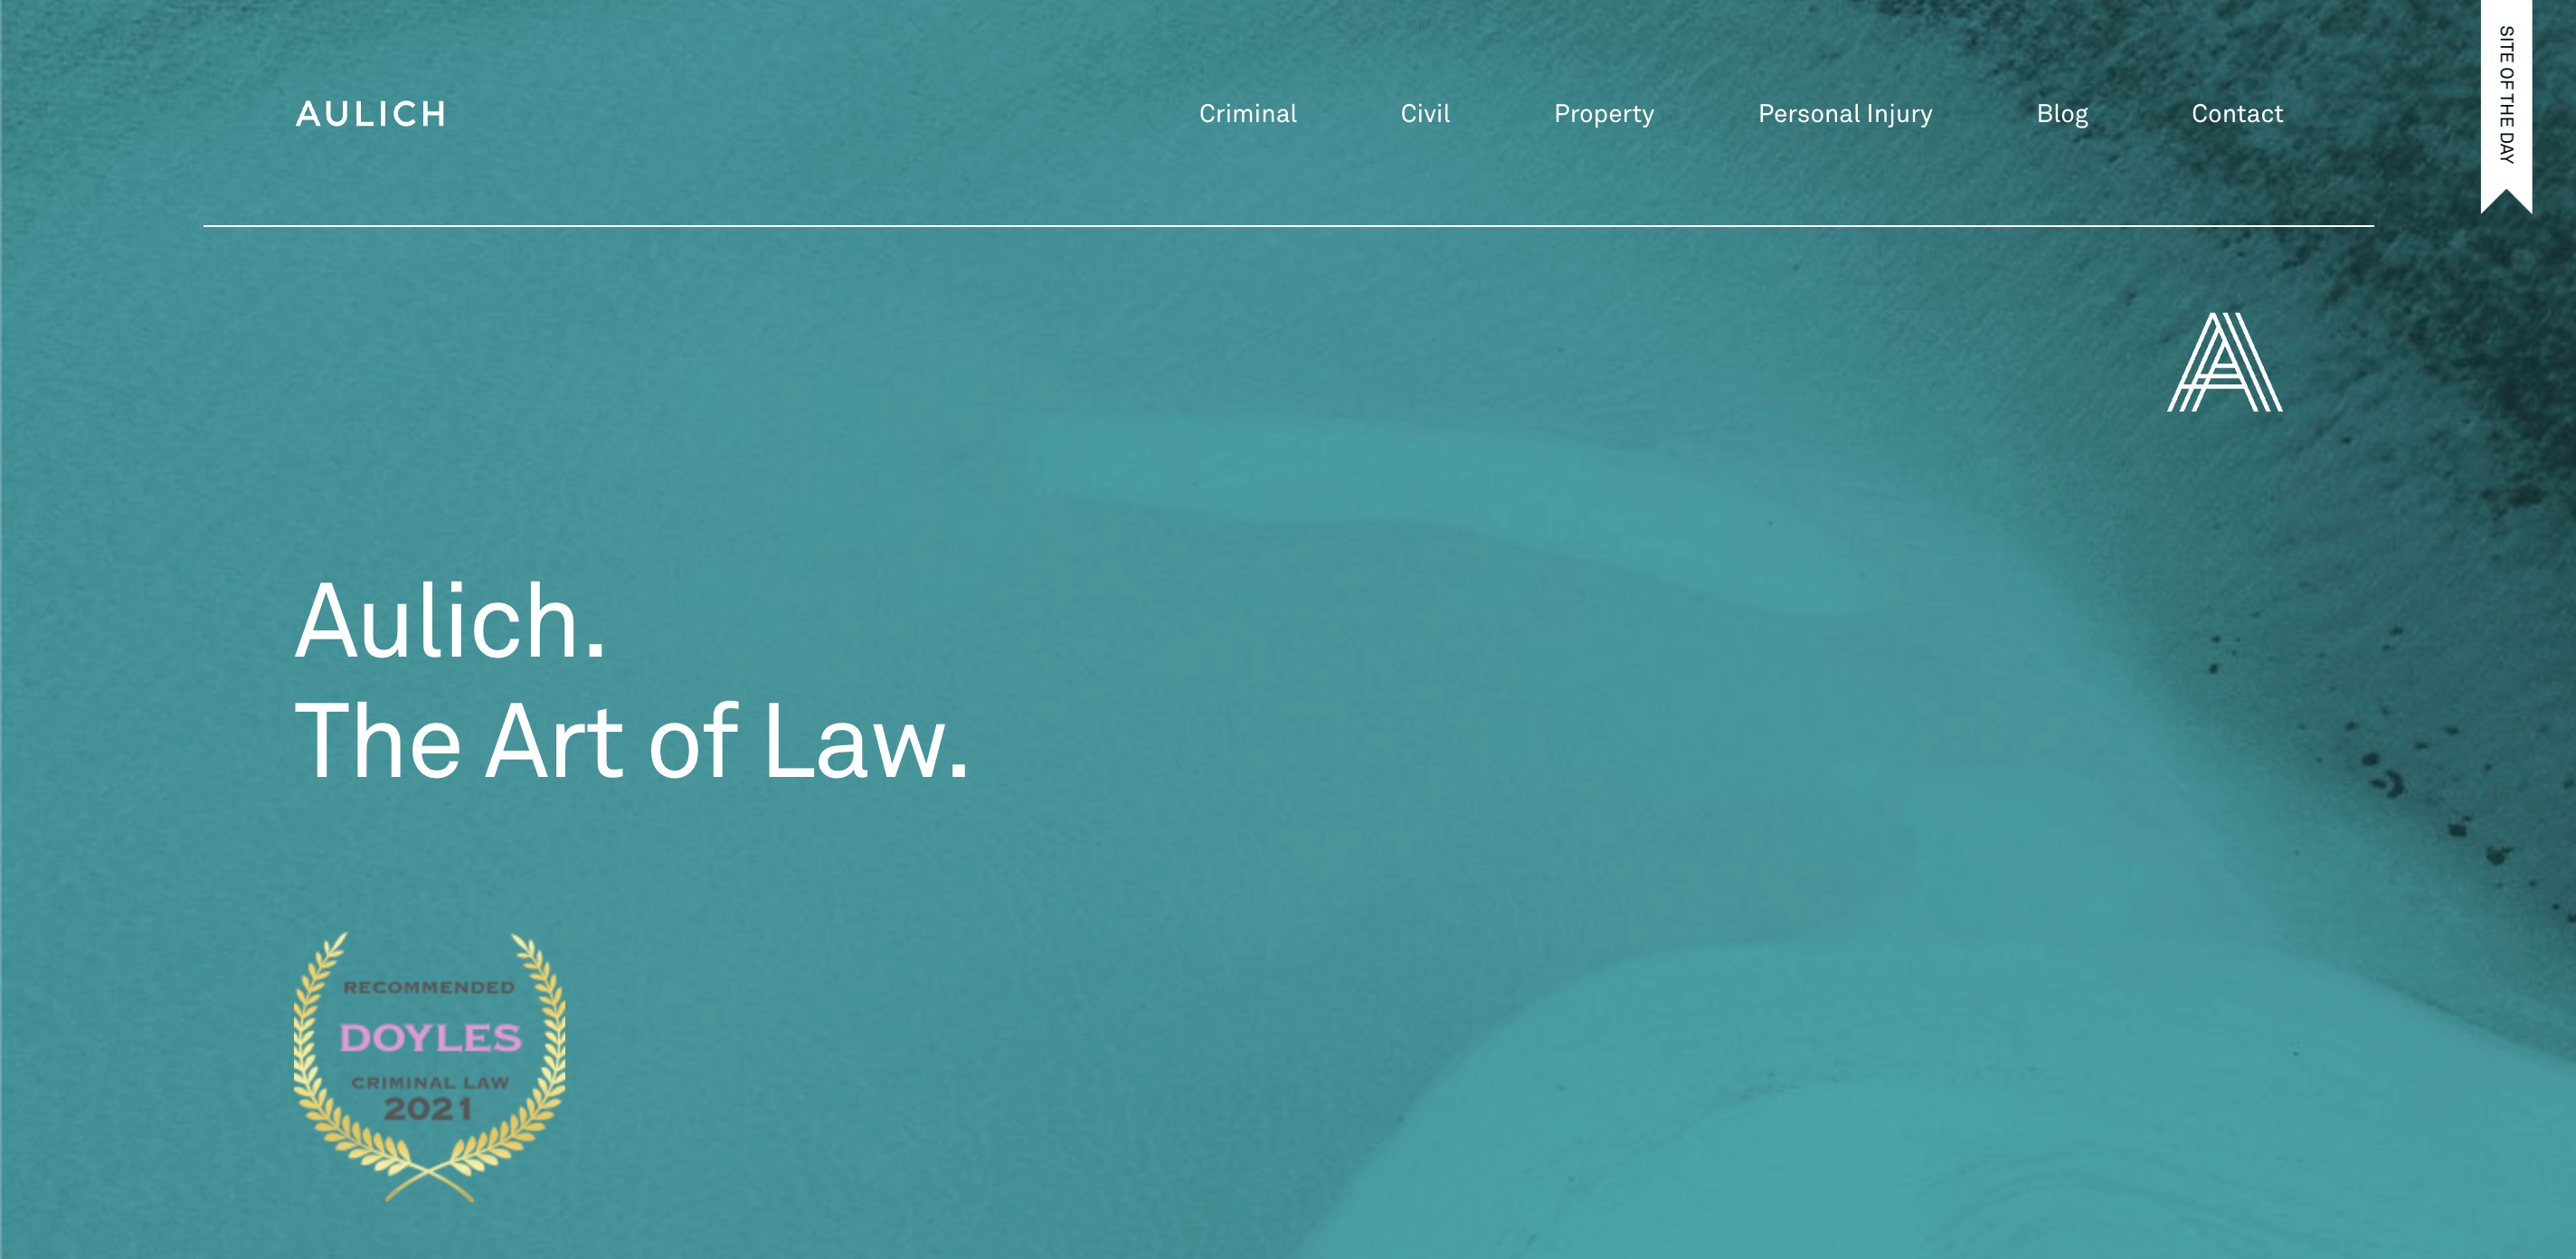 Aulich's homepage. The design is minimalist and sleek, featuring a background photo of a beach from overhead